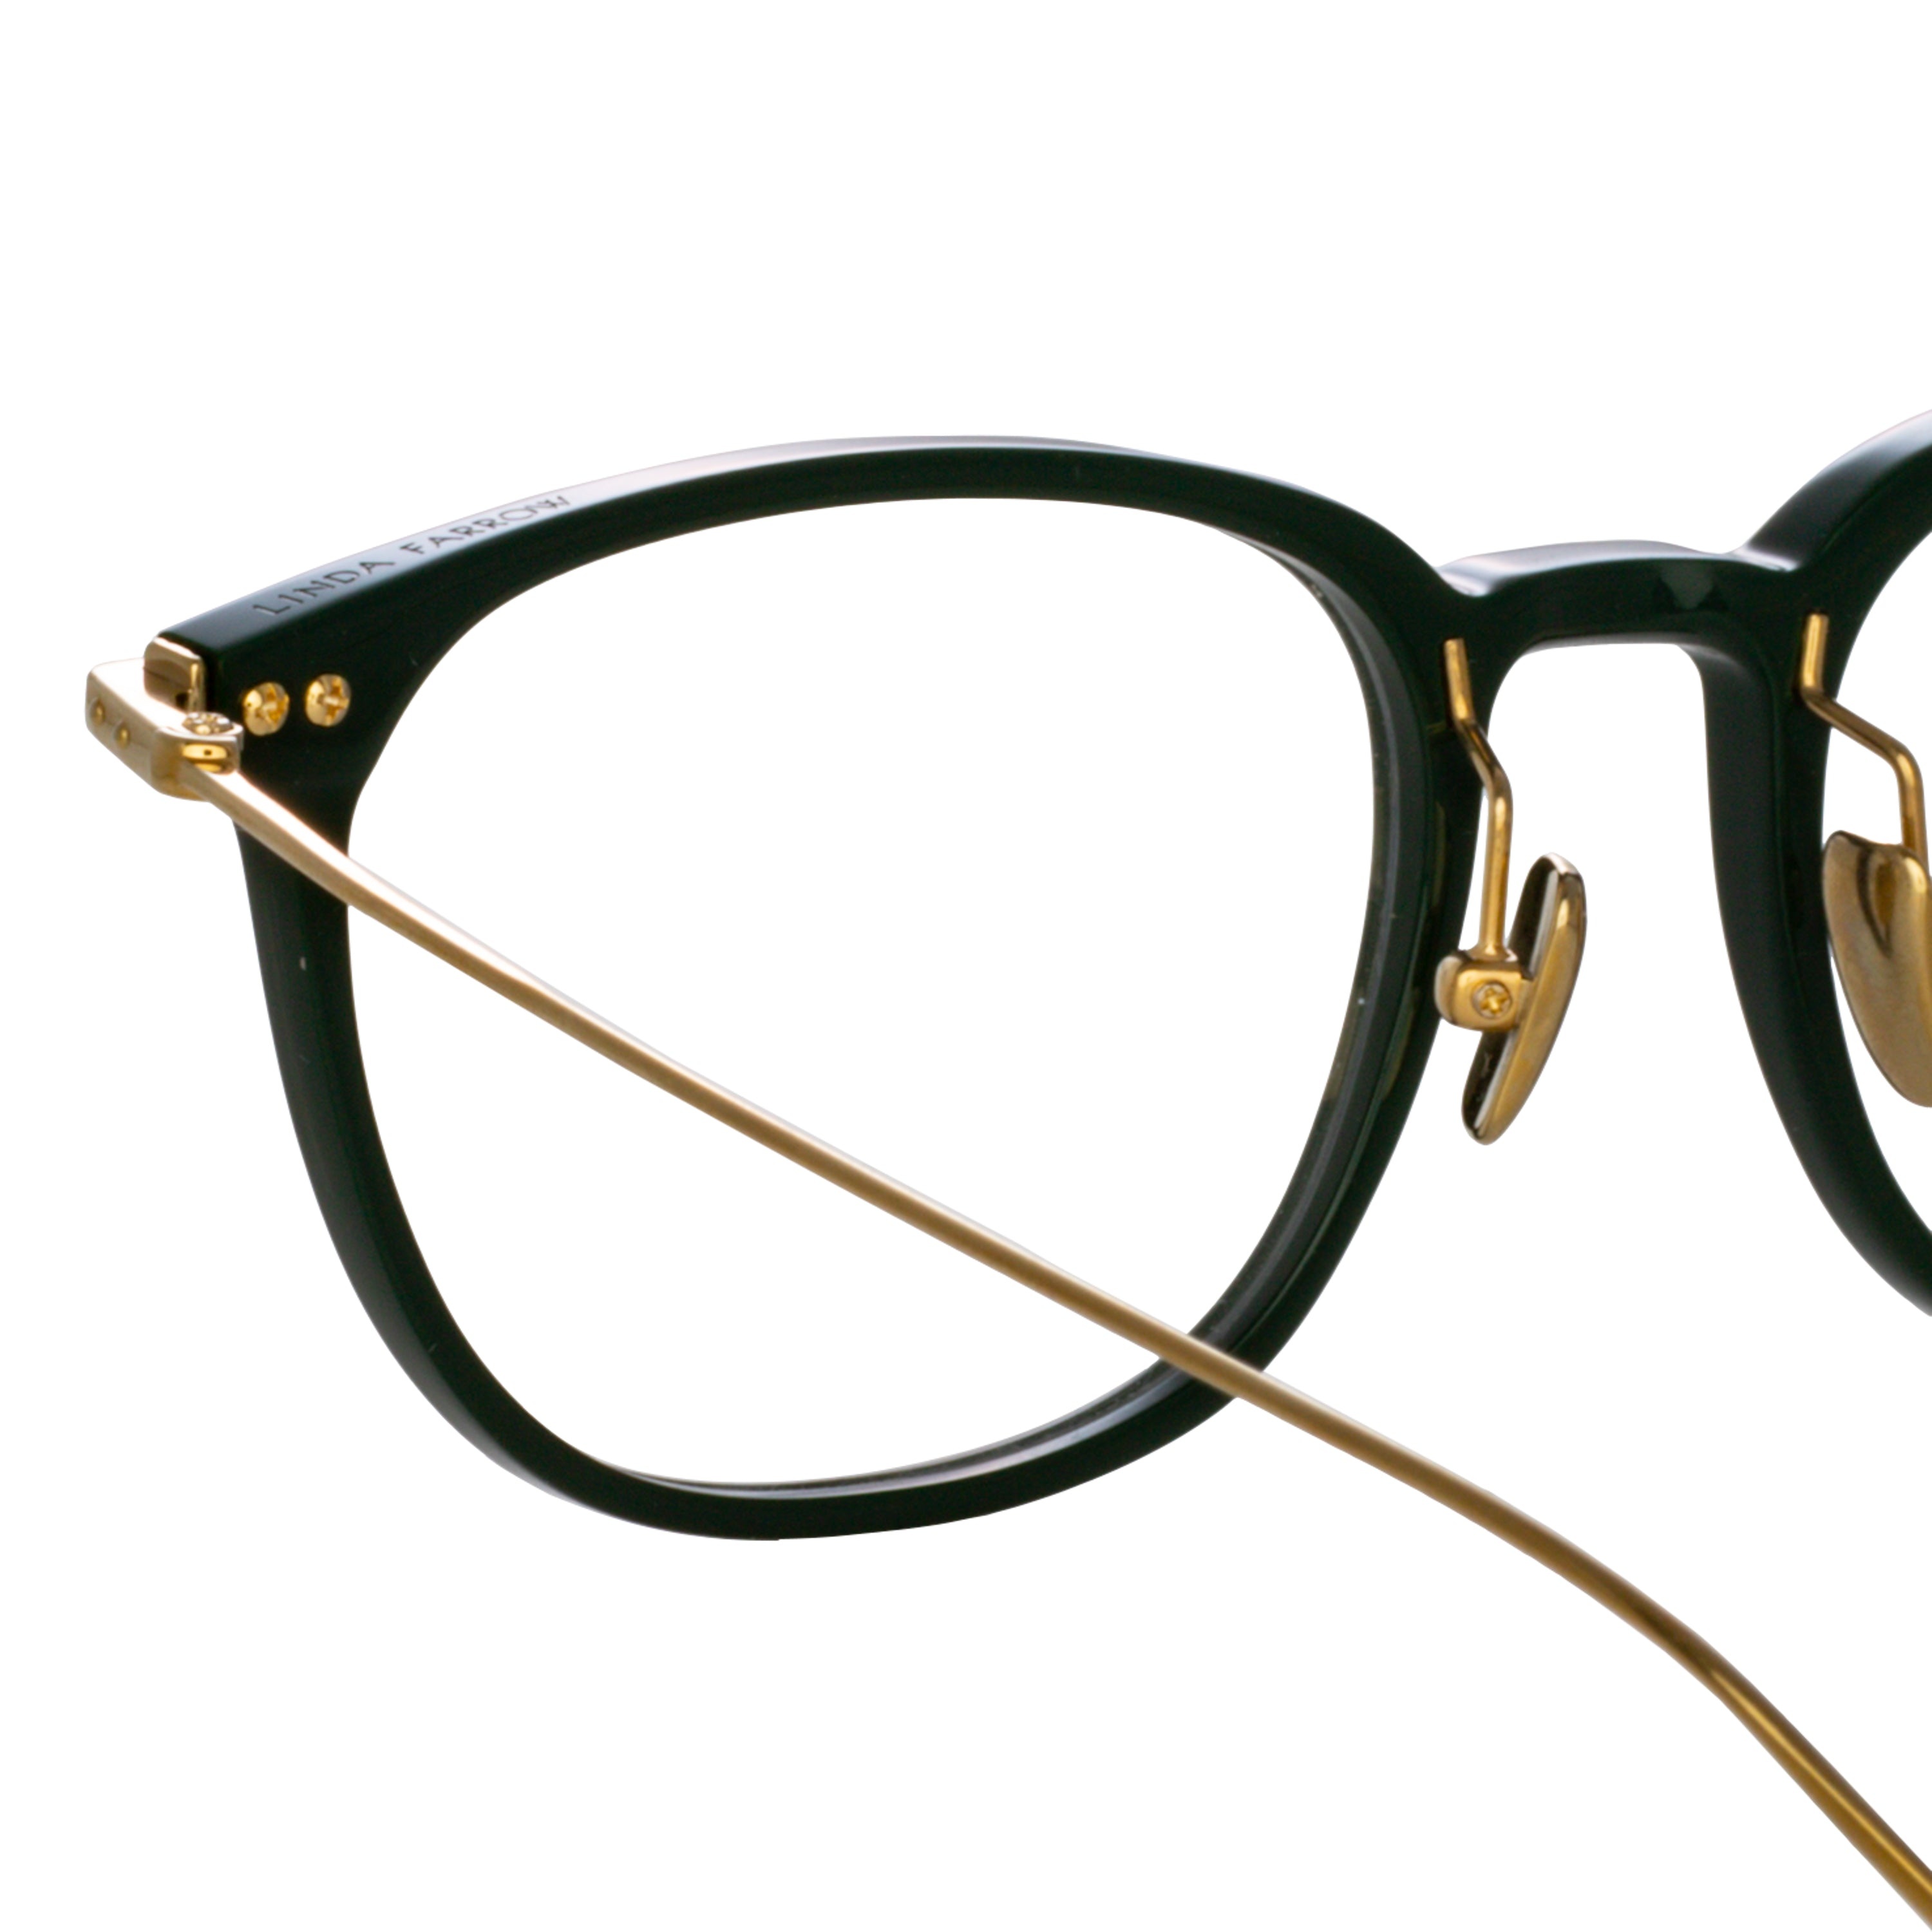 WRIGHT RECTANGULAR OPTICAL FRAME IN FOREST GREEN (ASIAN FIT) - 5